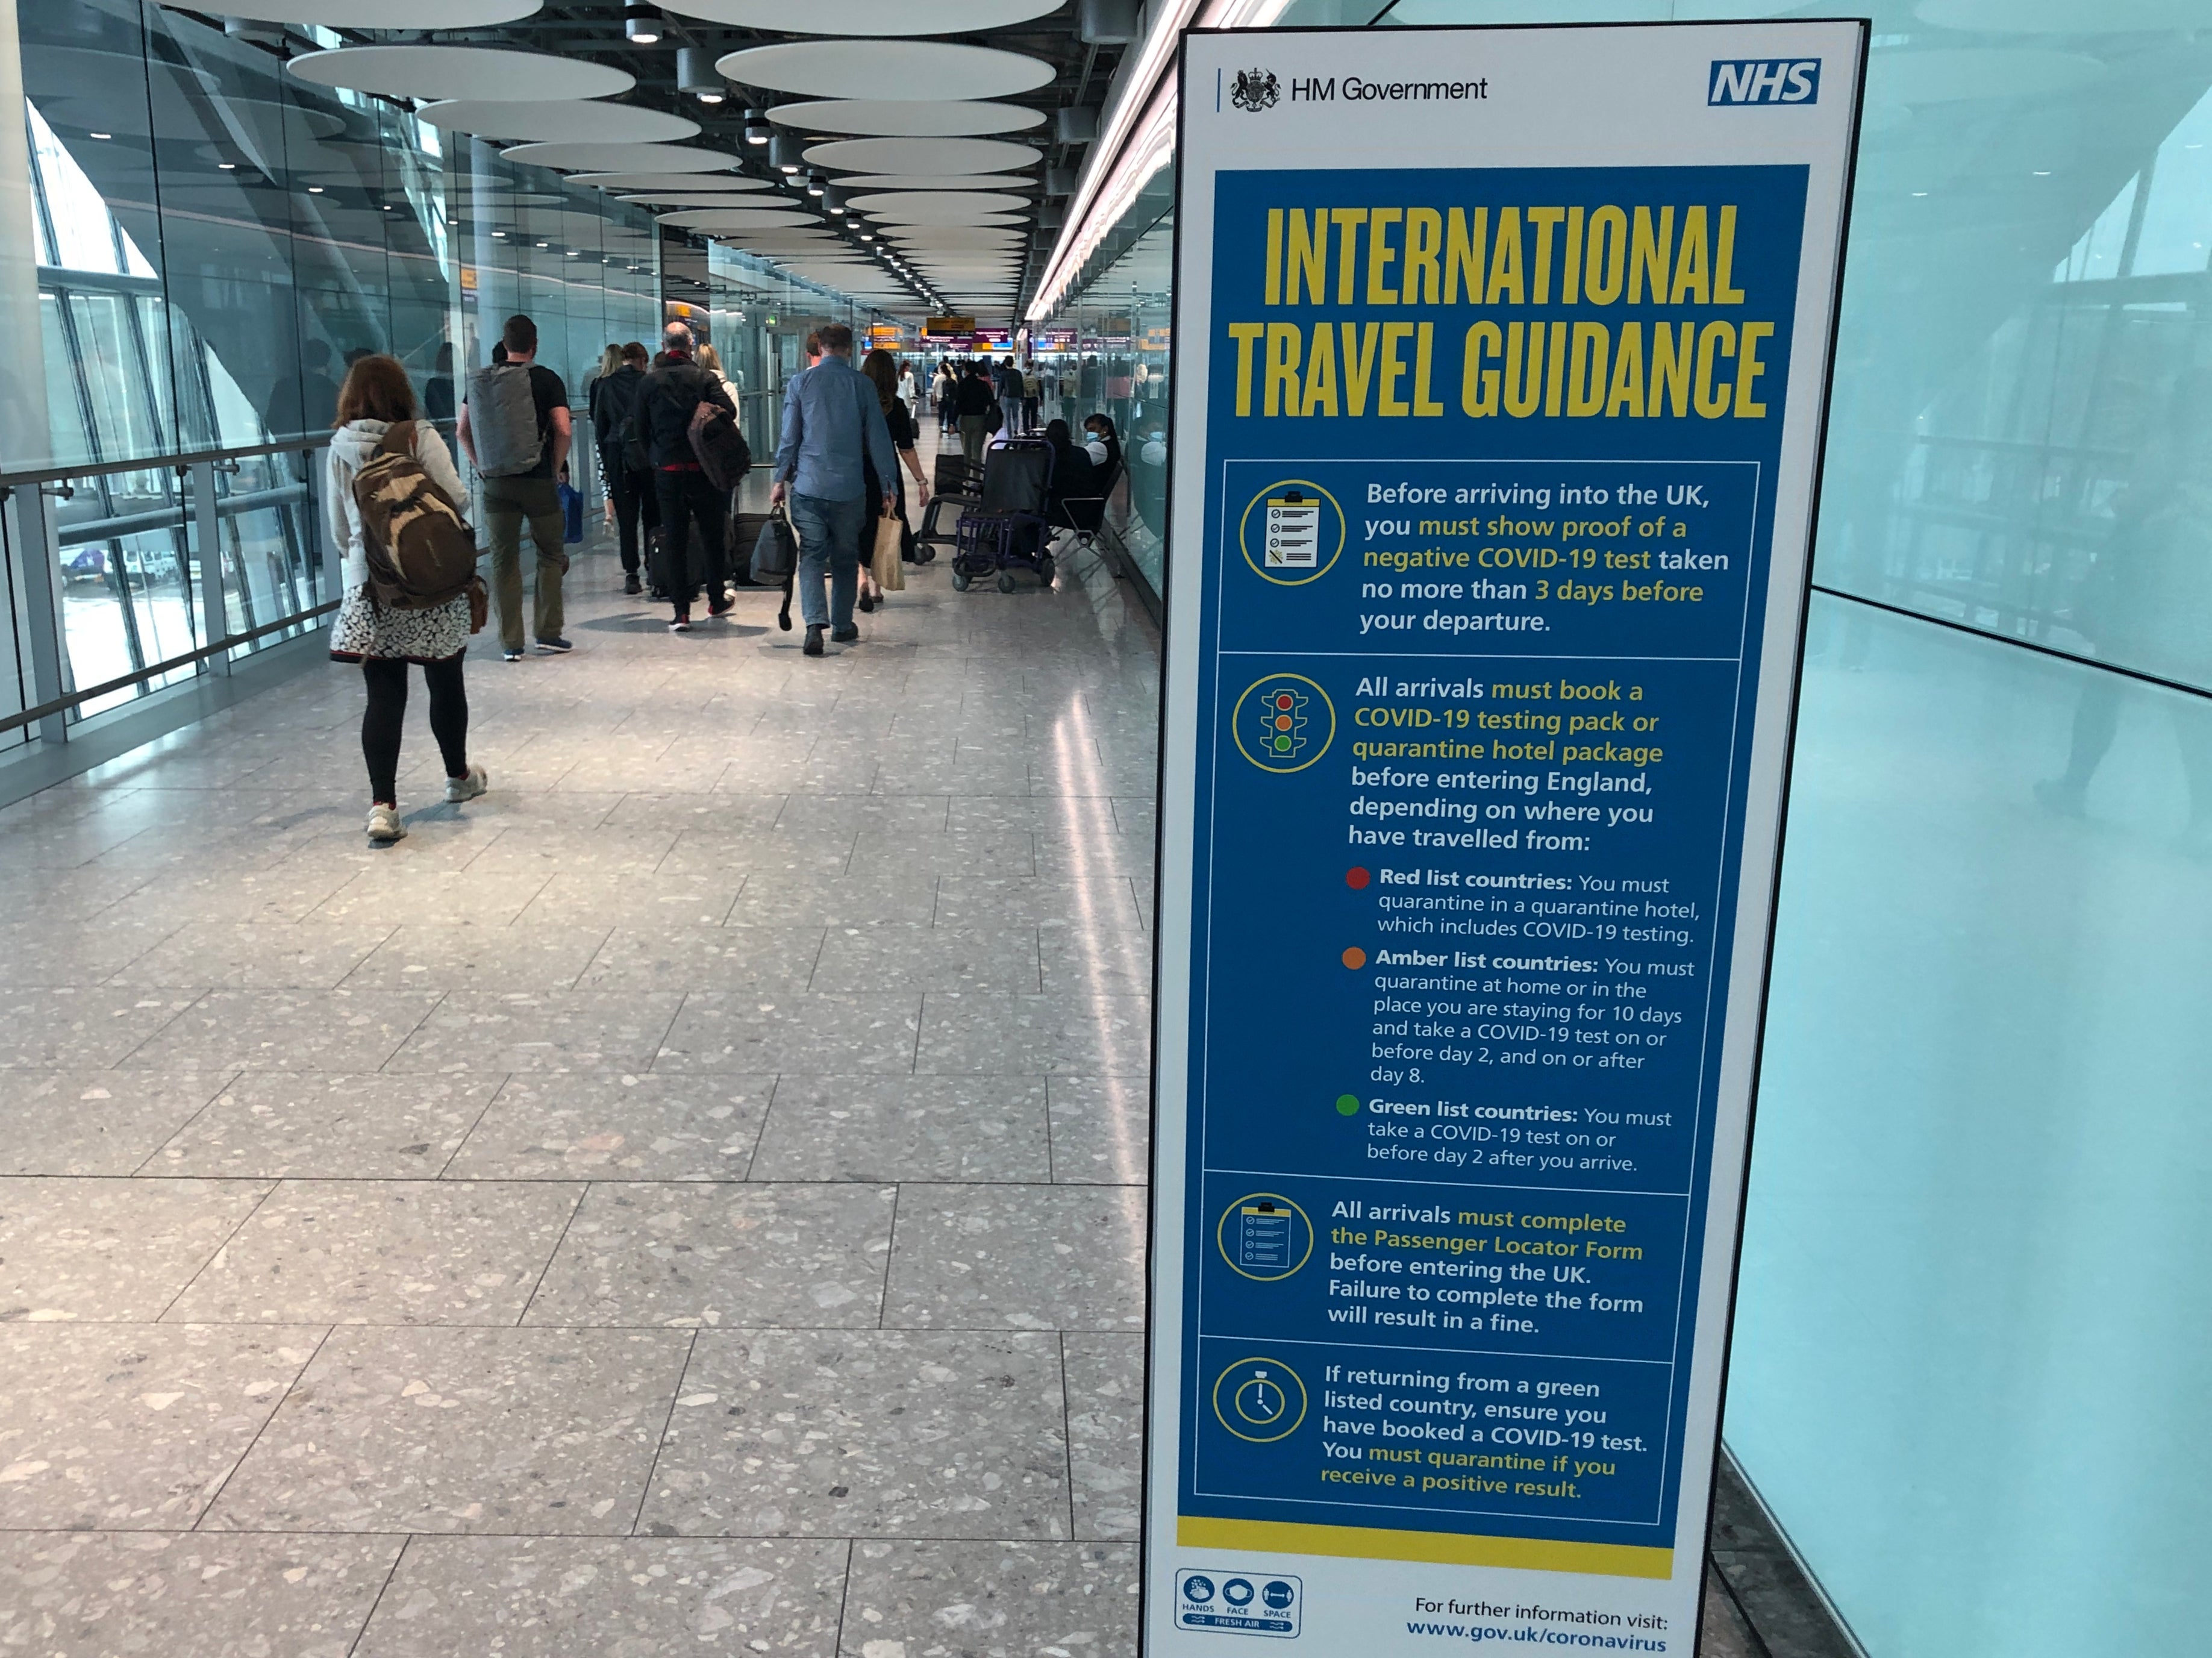 Papers please: travellers to the UK must complete a passenger locator form and take multiple tests